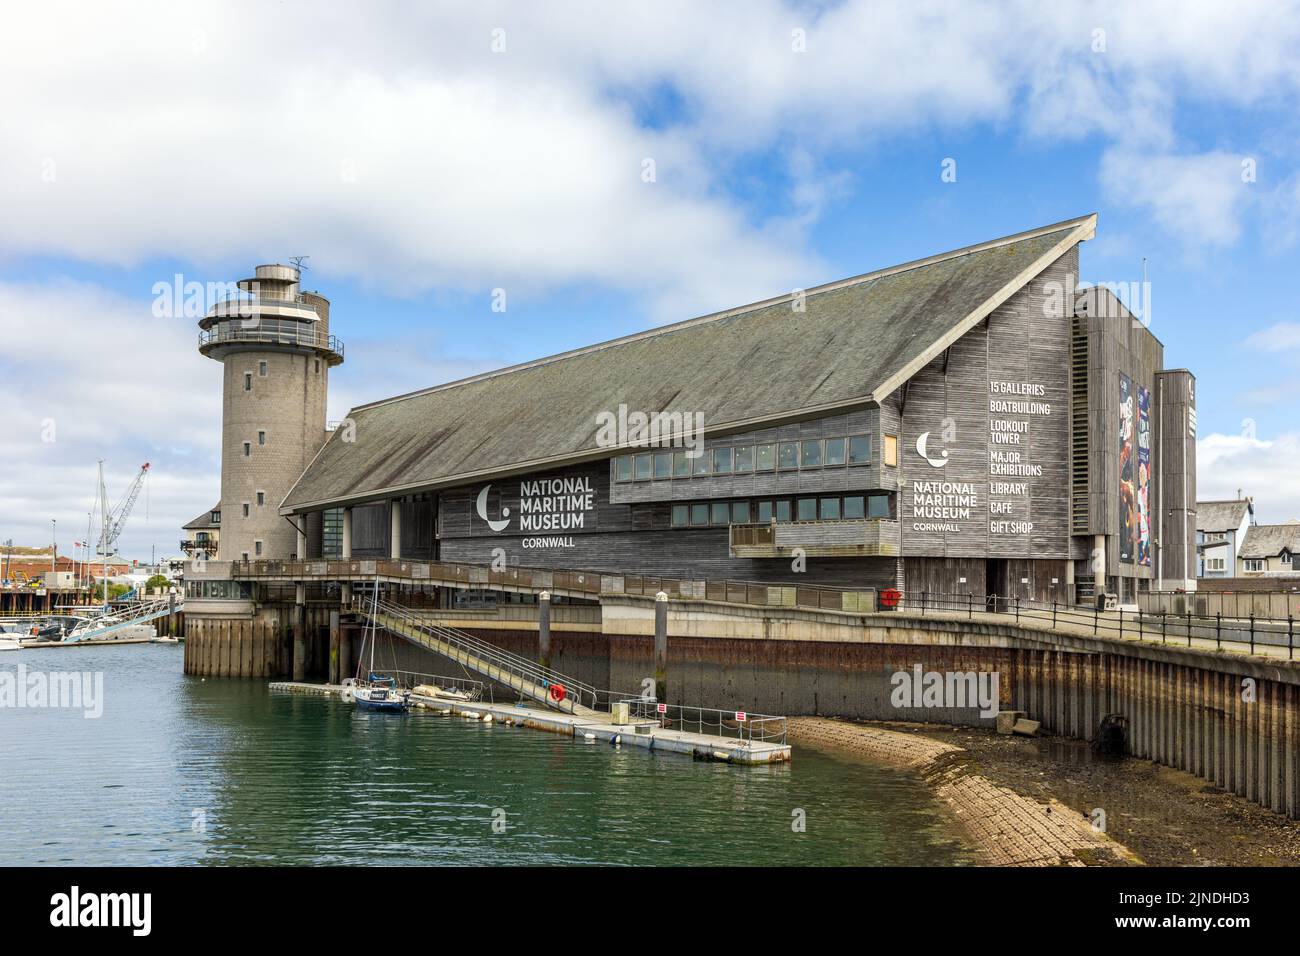 The National Maritime Museum at Discovery Quay in Falmouth, Cornwall, designed by architect M. J. Long. Stock Photo